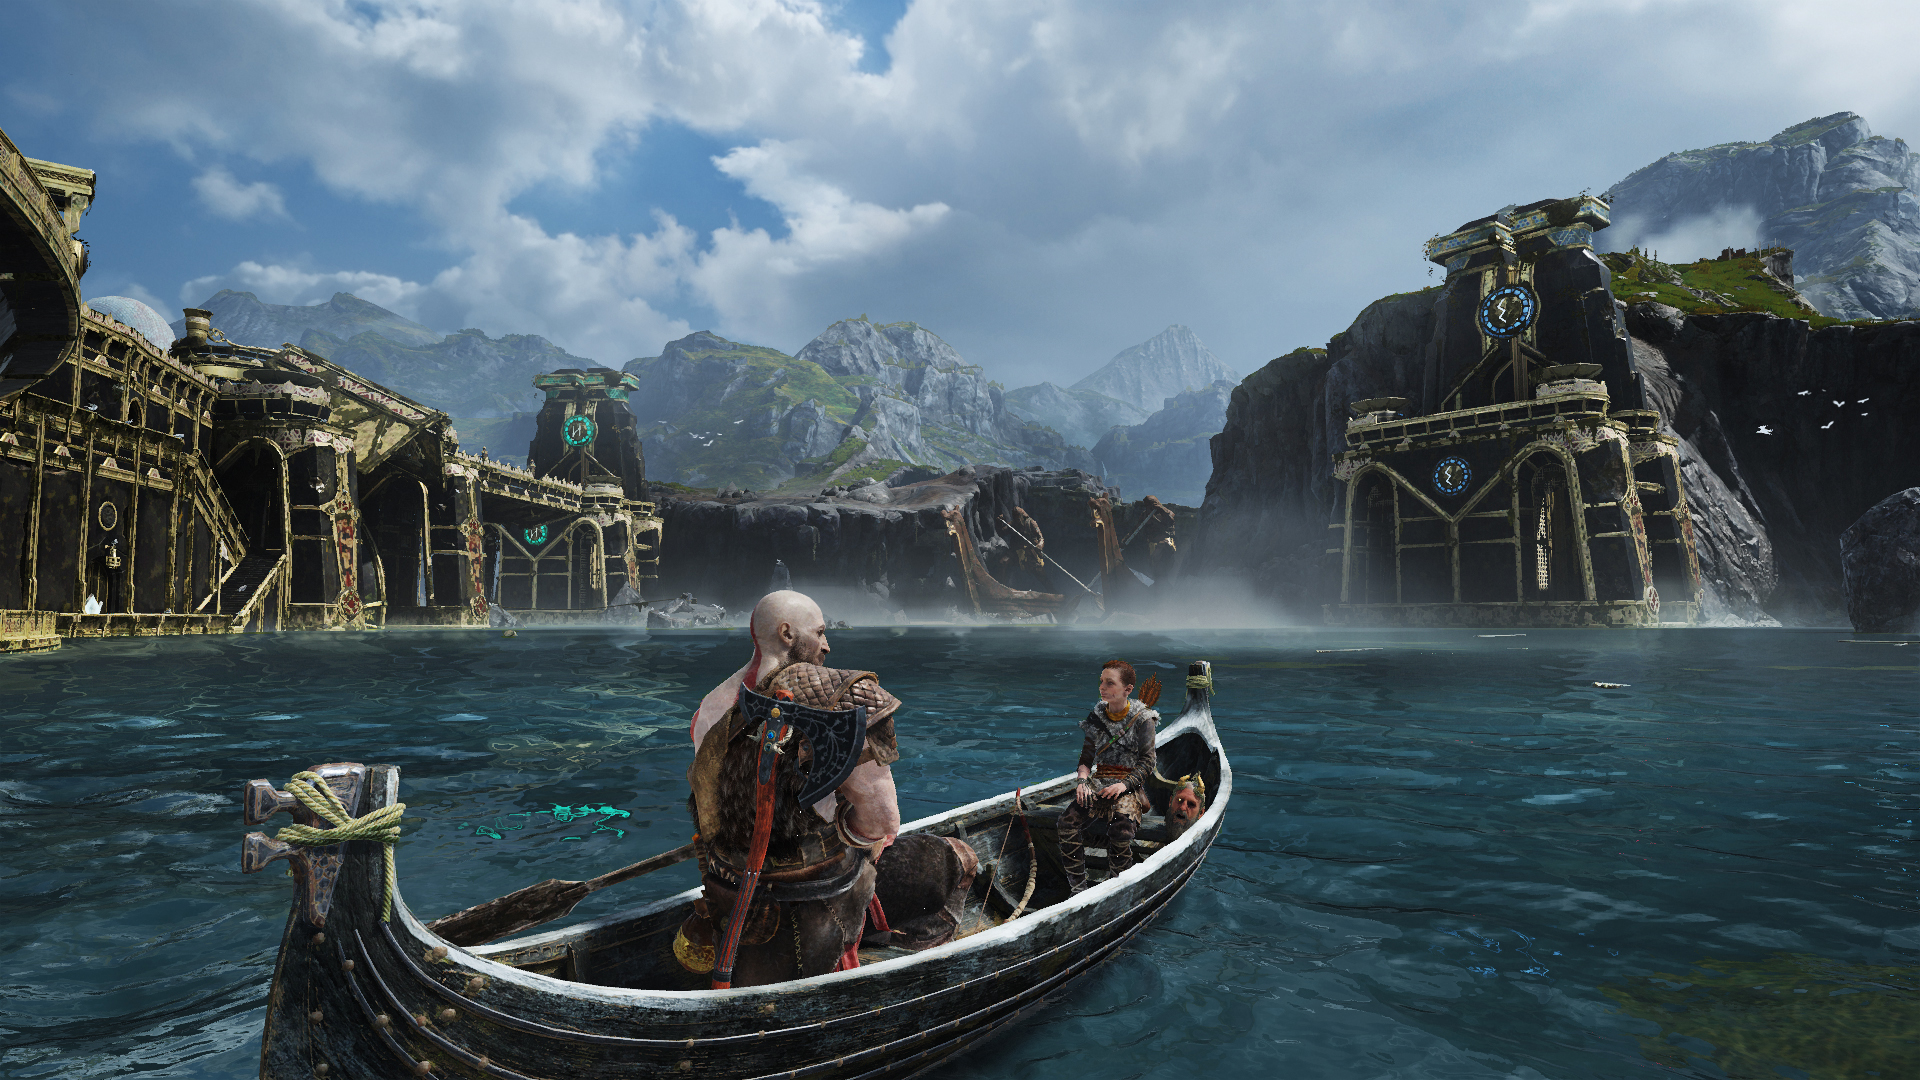 A scene from the new God of War game (Courtesy of Sony Interactive Entertainment America)